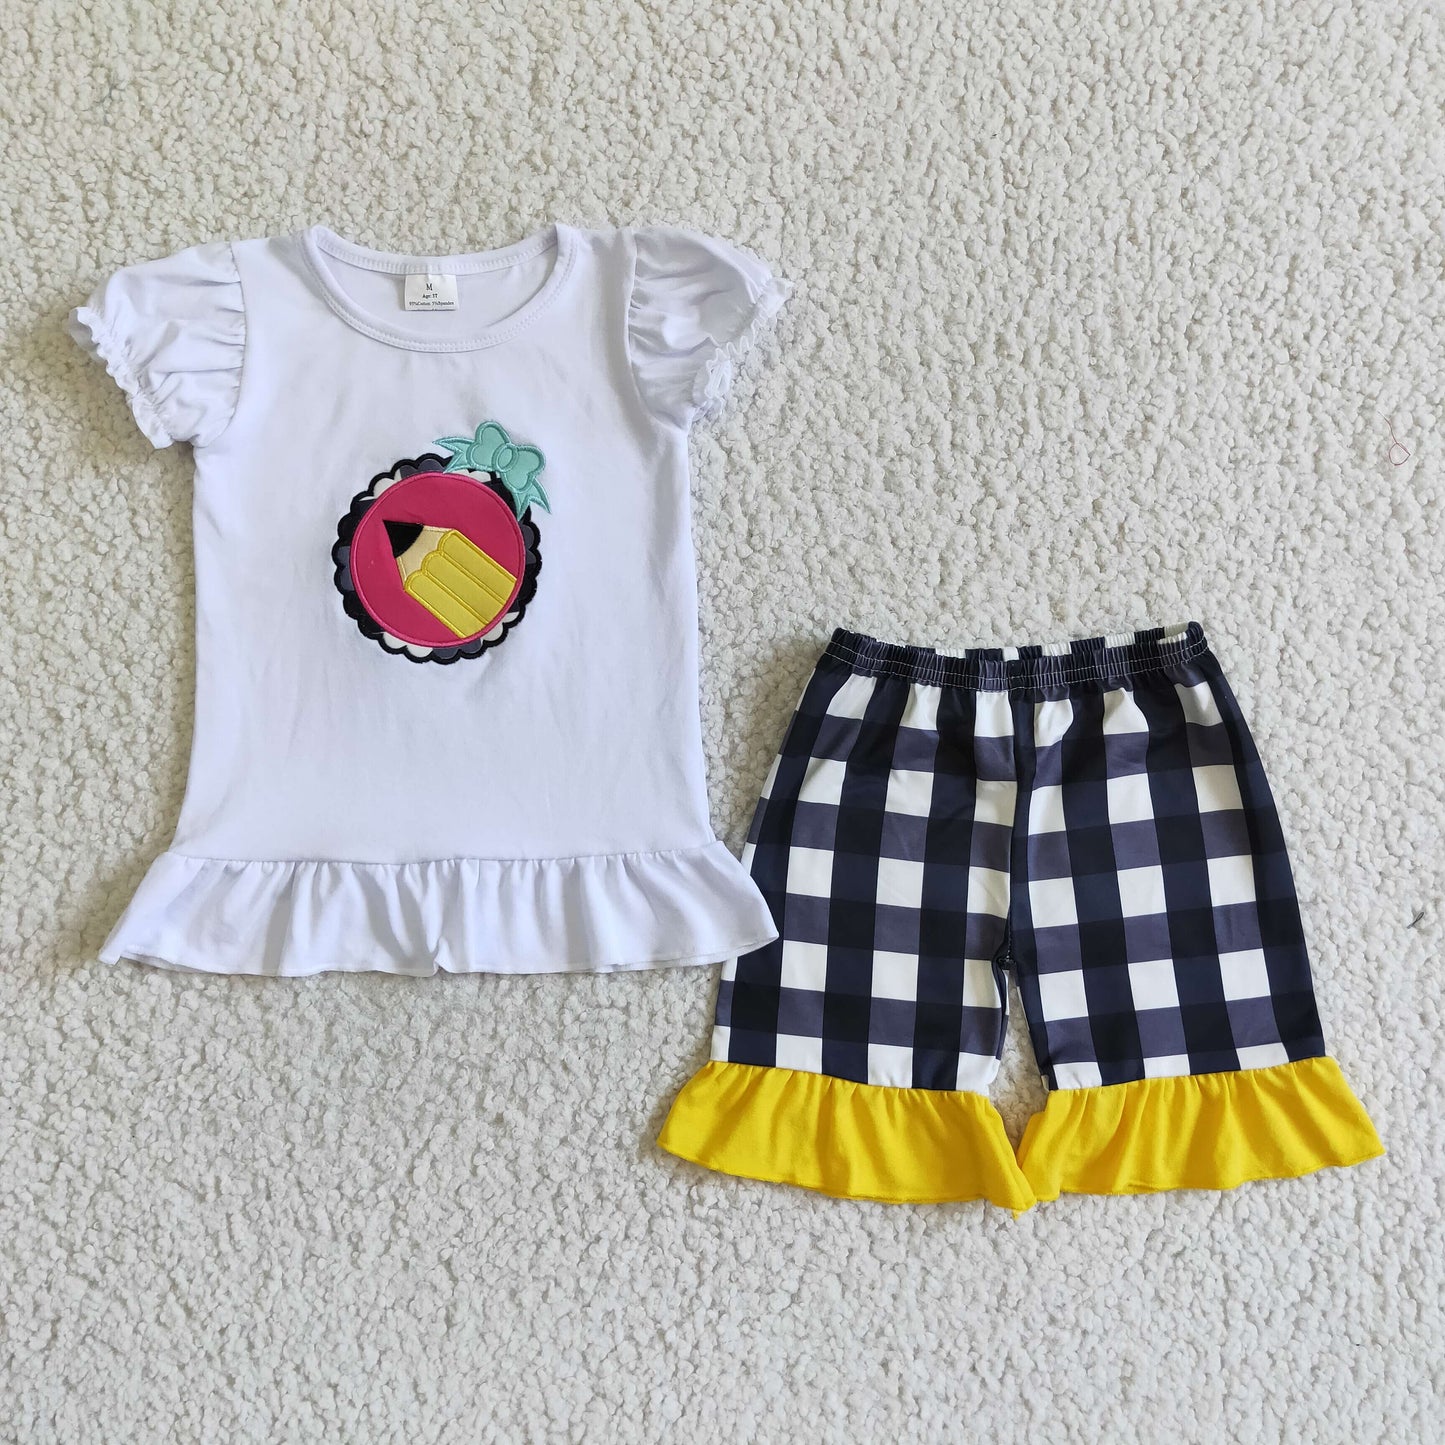 Pencil embroidery plaid shorts girls back to school clothes